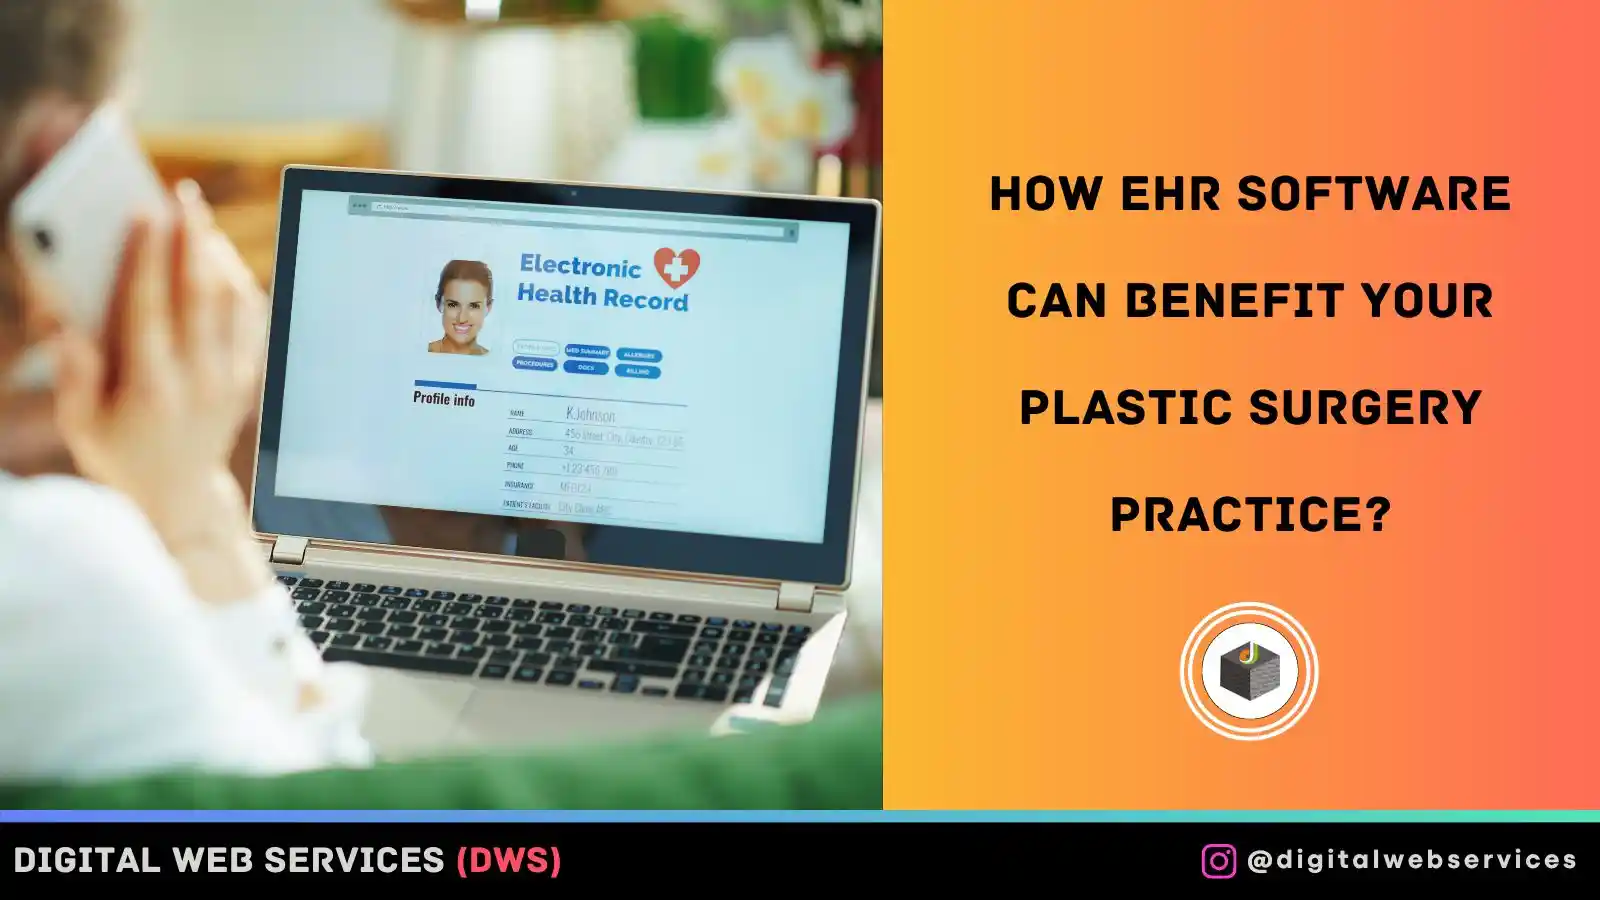 How EHR Software Can Benefit Your Plastic Surgery Practice